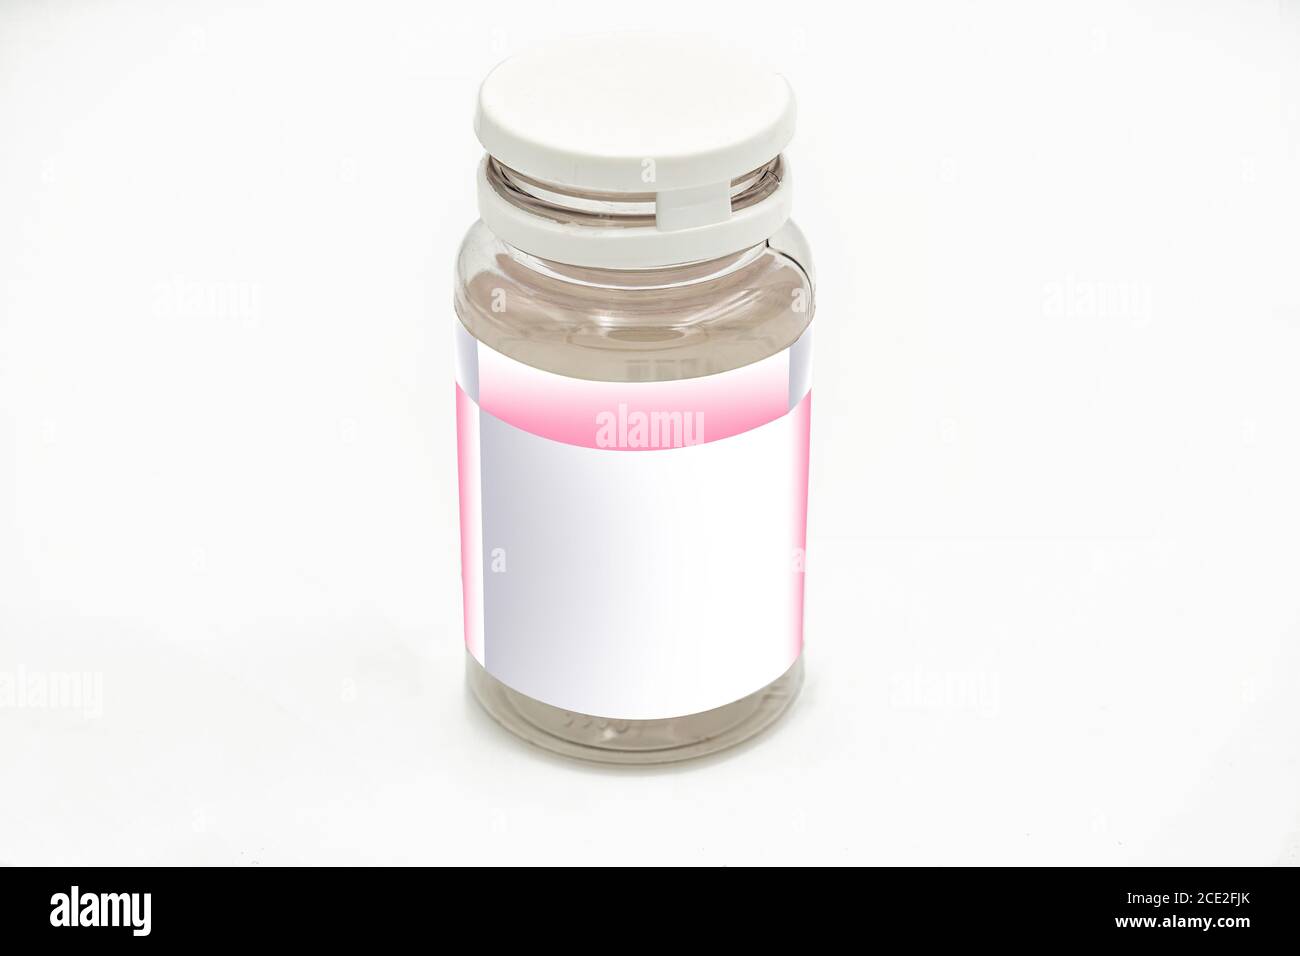 An empty pill bottle with white and pink label mockup, on a white background, ideal for pharmaceutical and research use Stock Photo